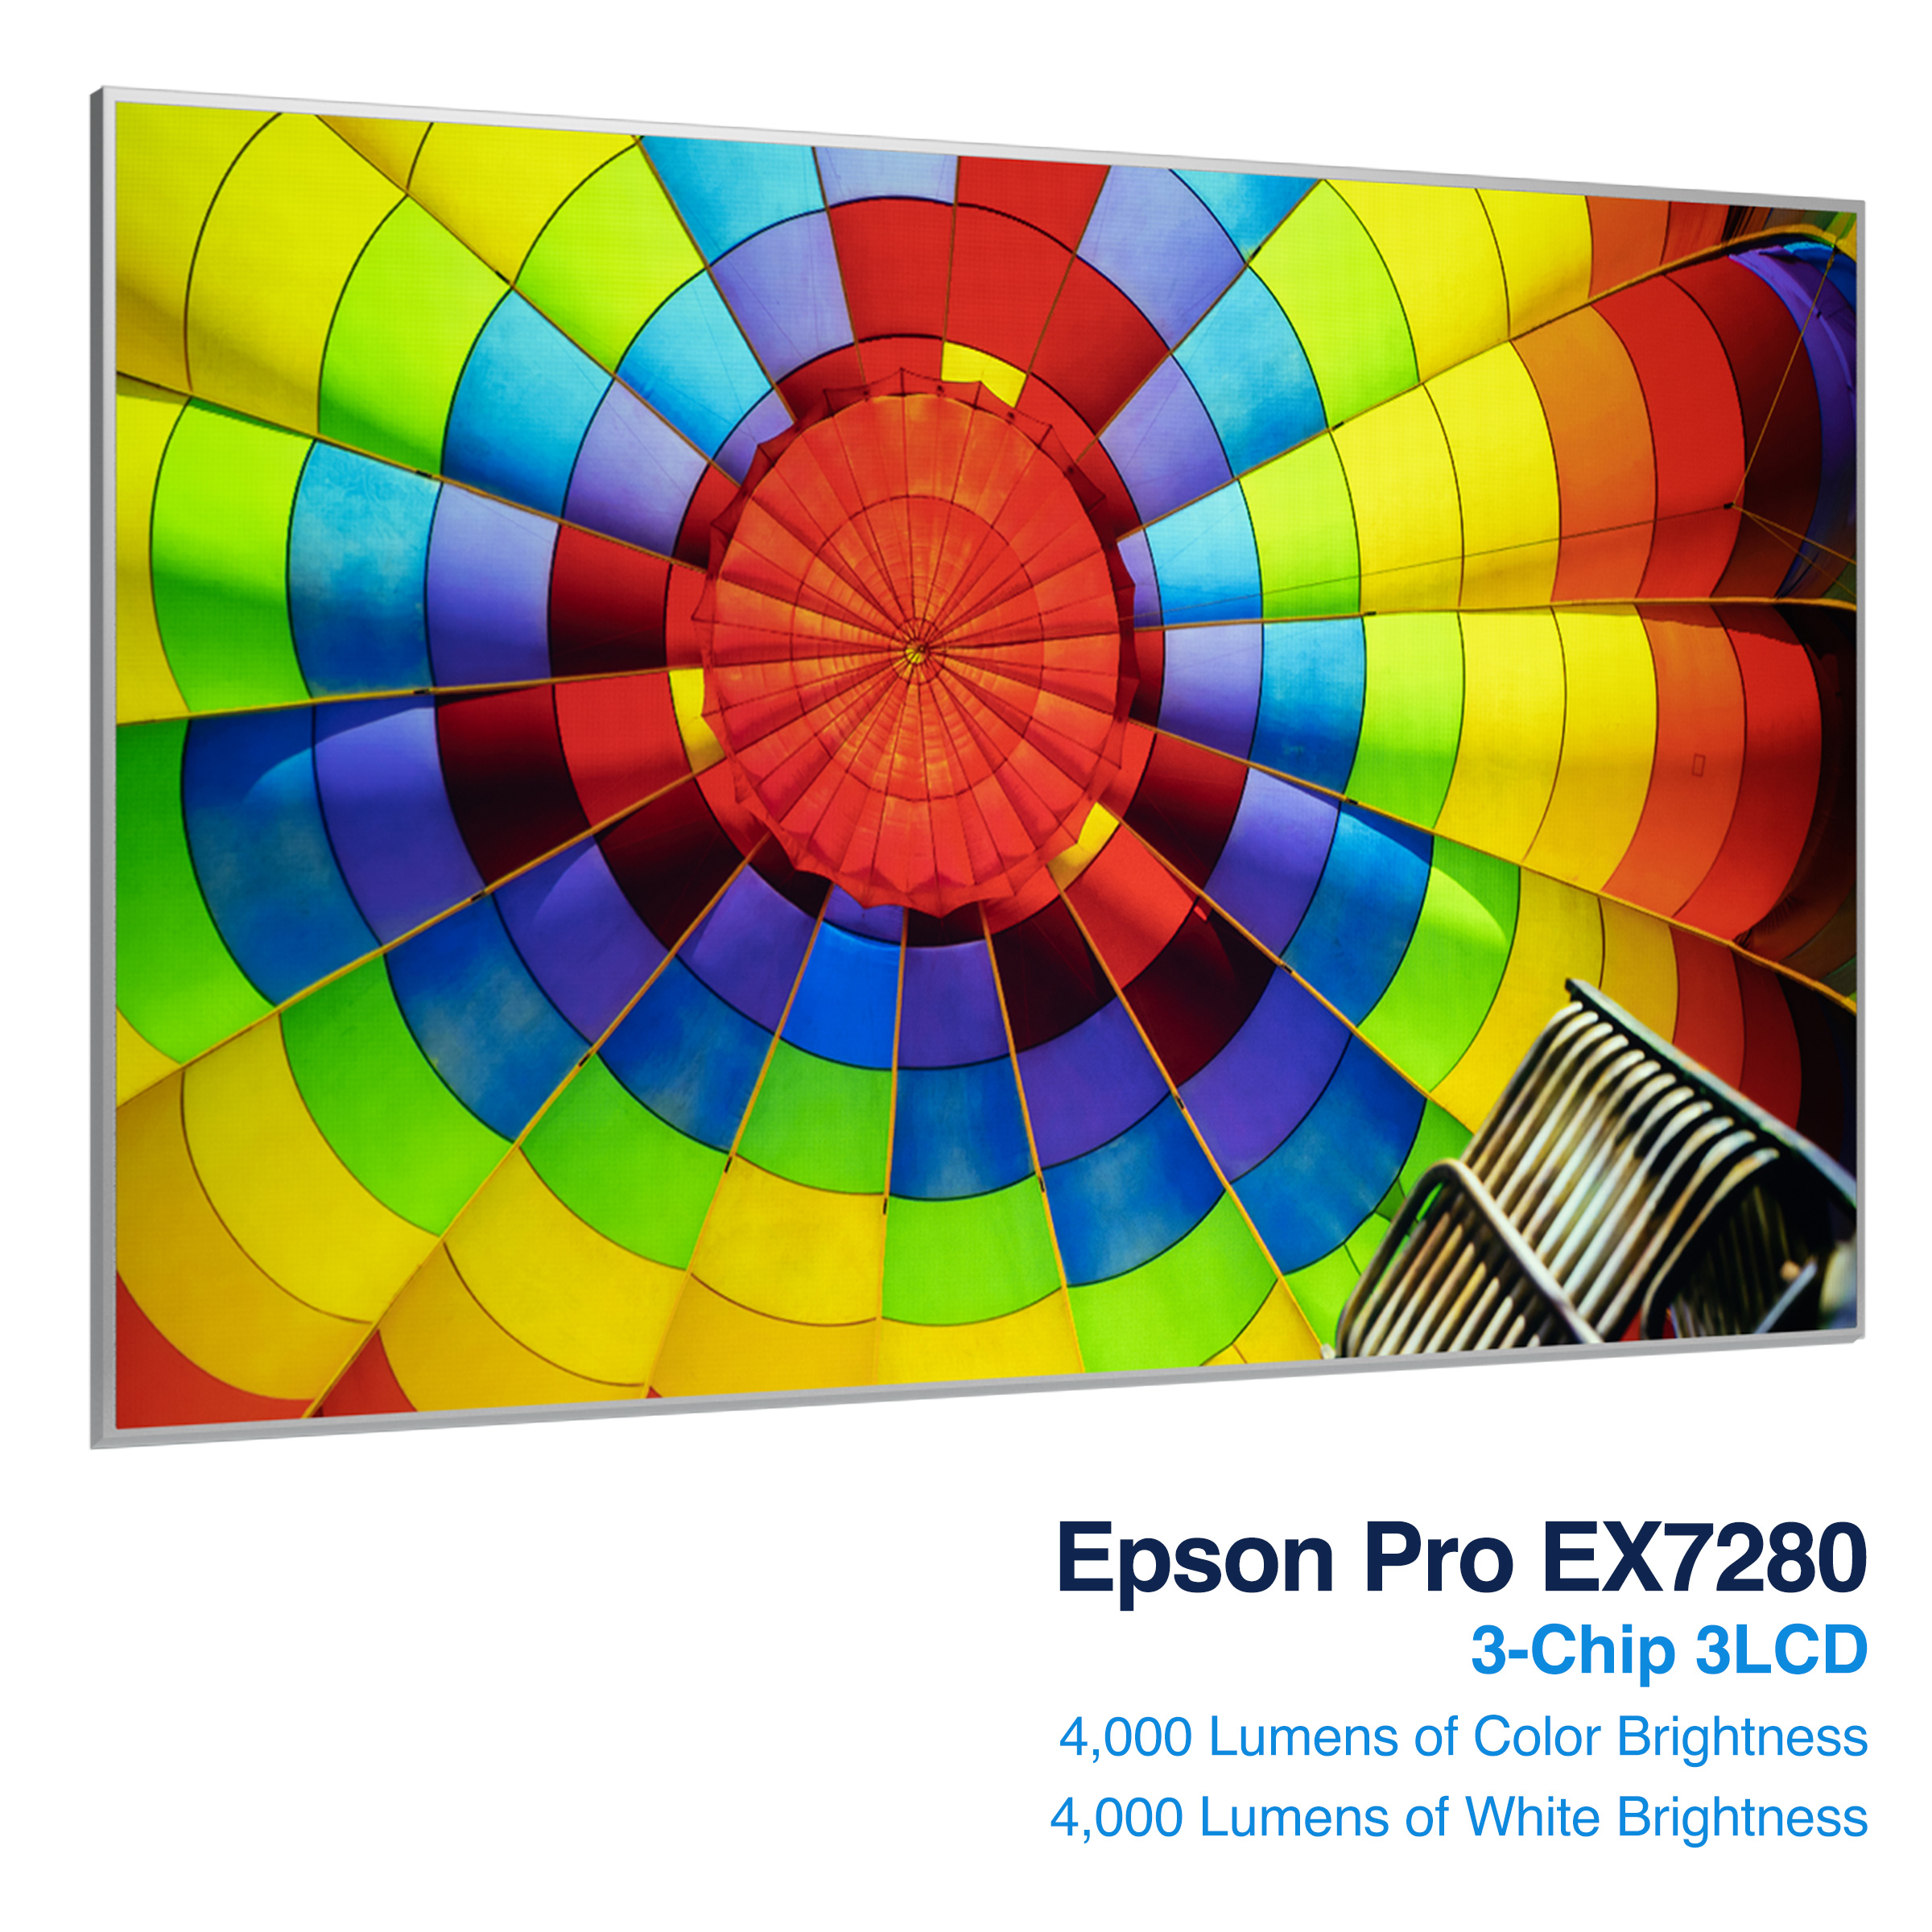 Projected image of hot air balloon from Epson Pro EX7280.